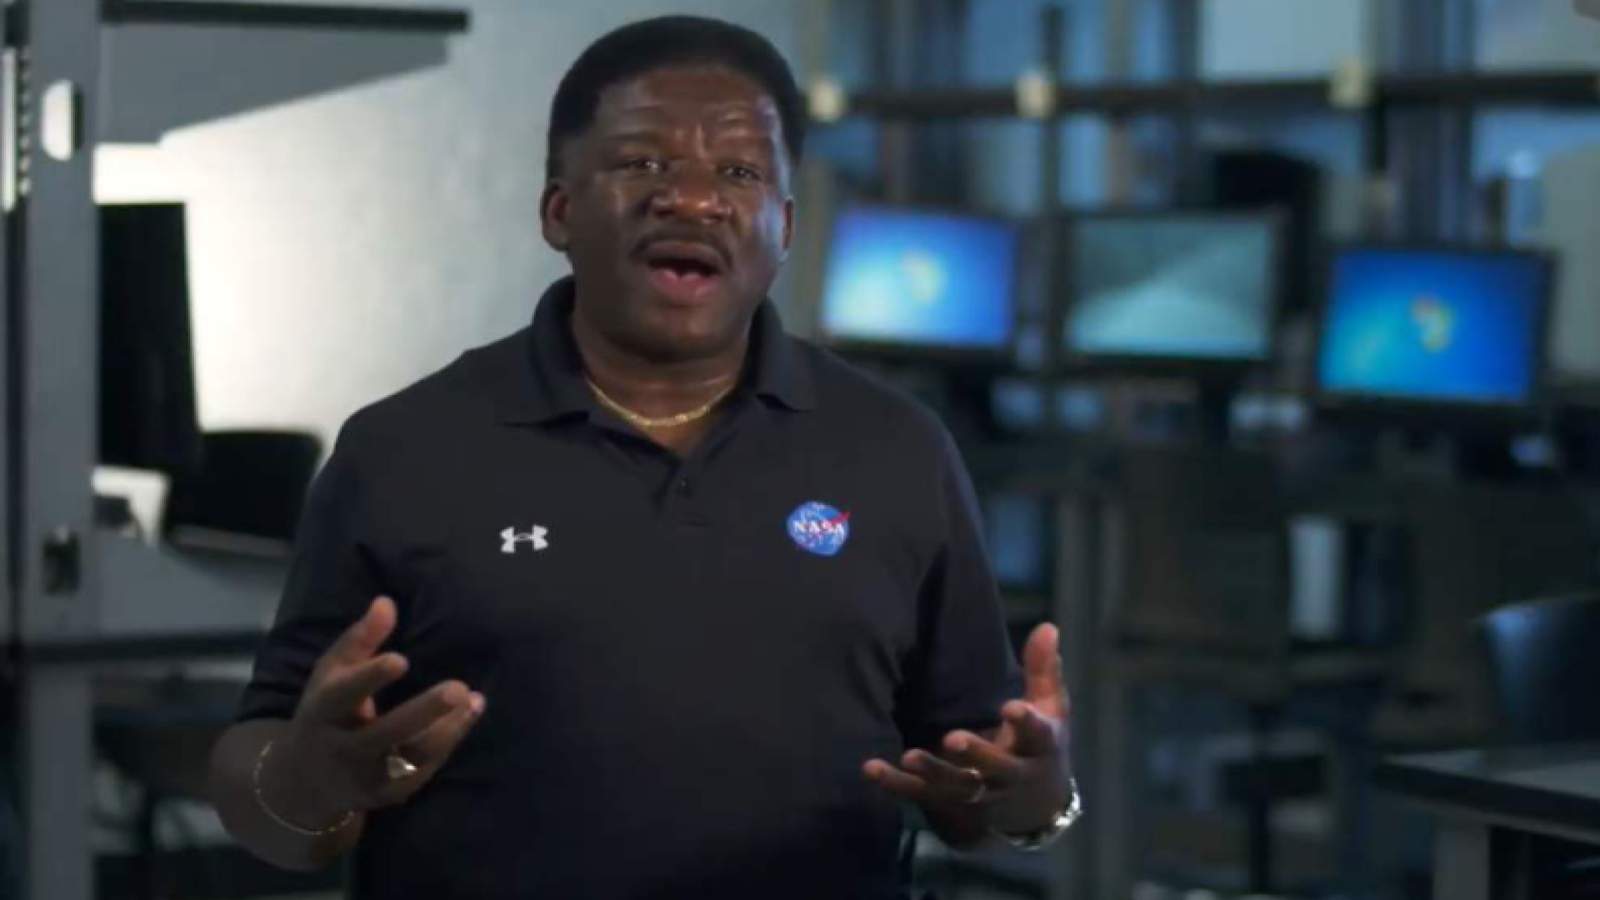 Former NASA engineer works to expose students of color to Black history, STEM